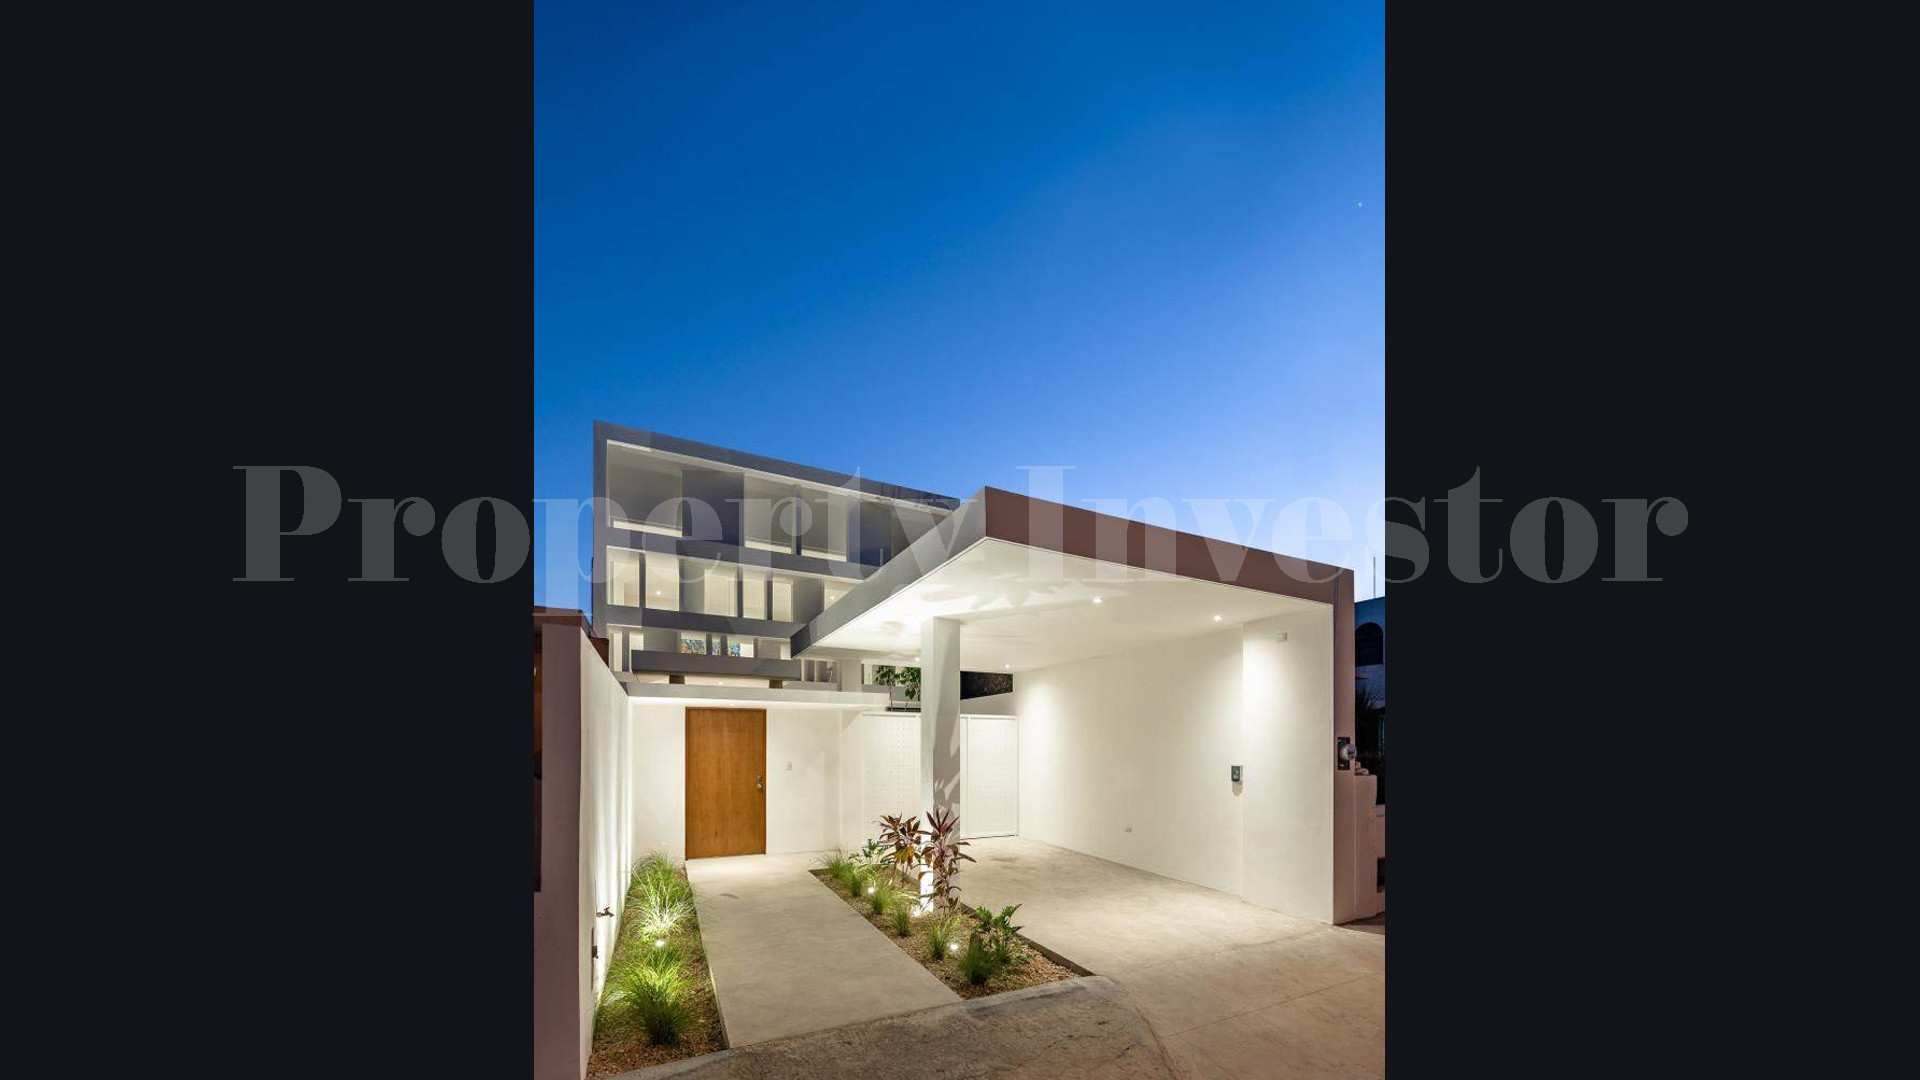 Brand New 3 Bedroom Contemporary Home in Upscale Area for Sale in Mérida, Mexico